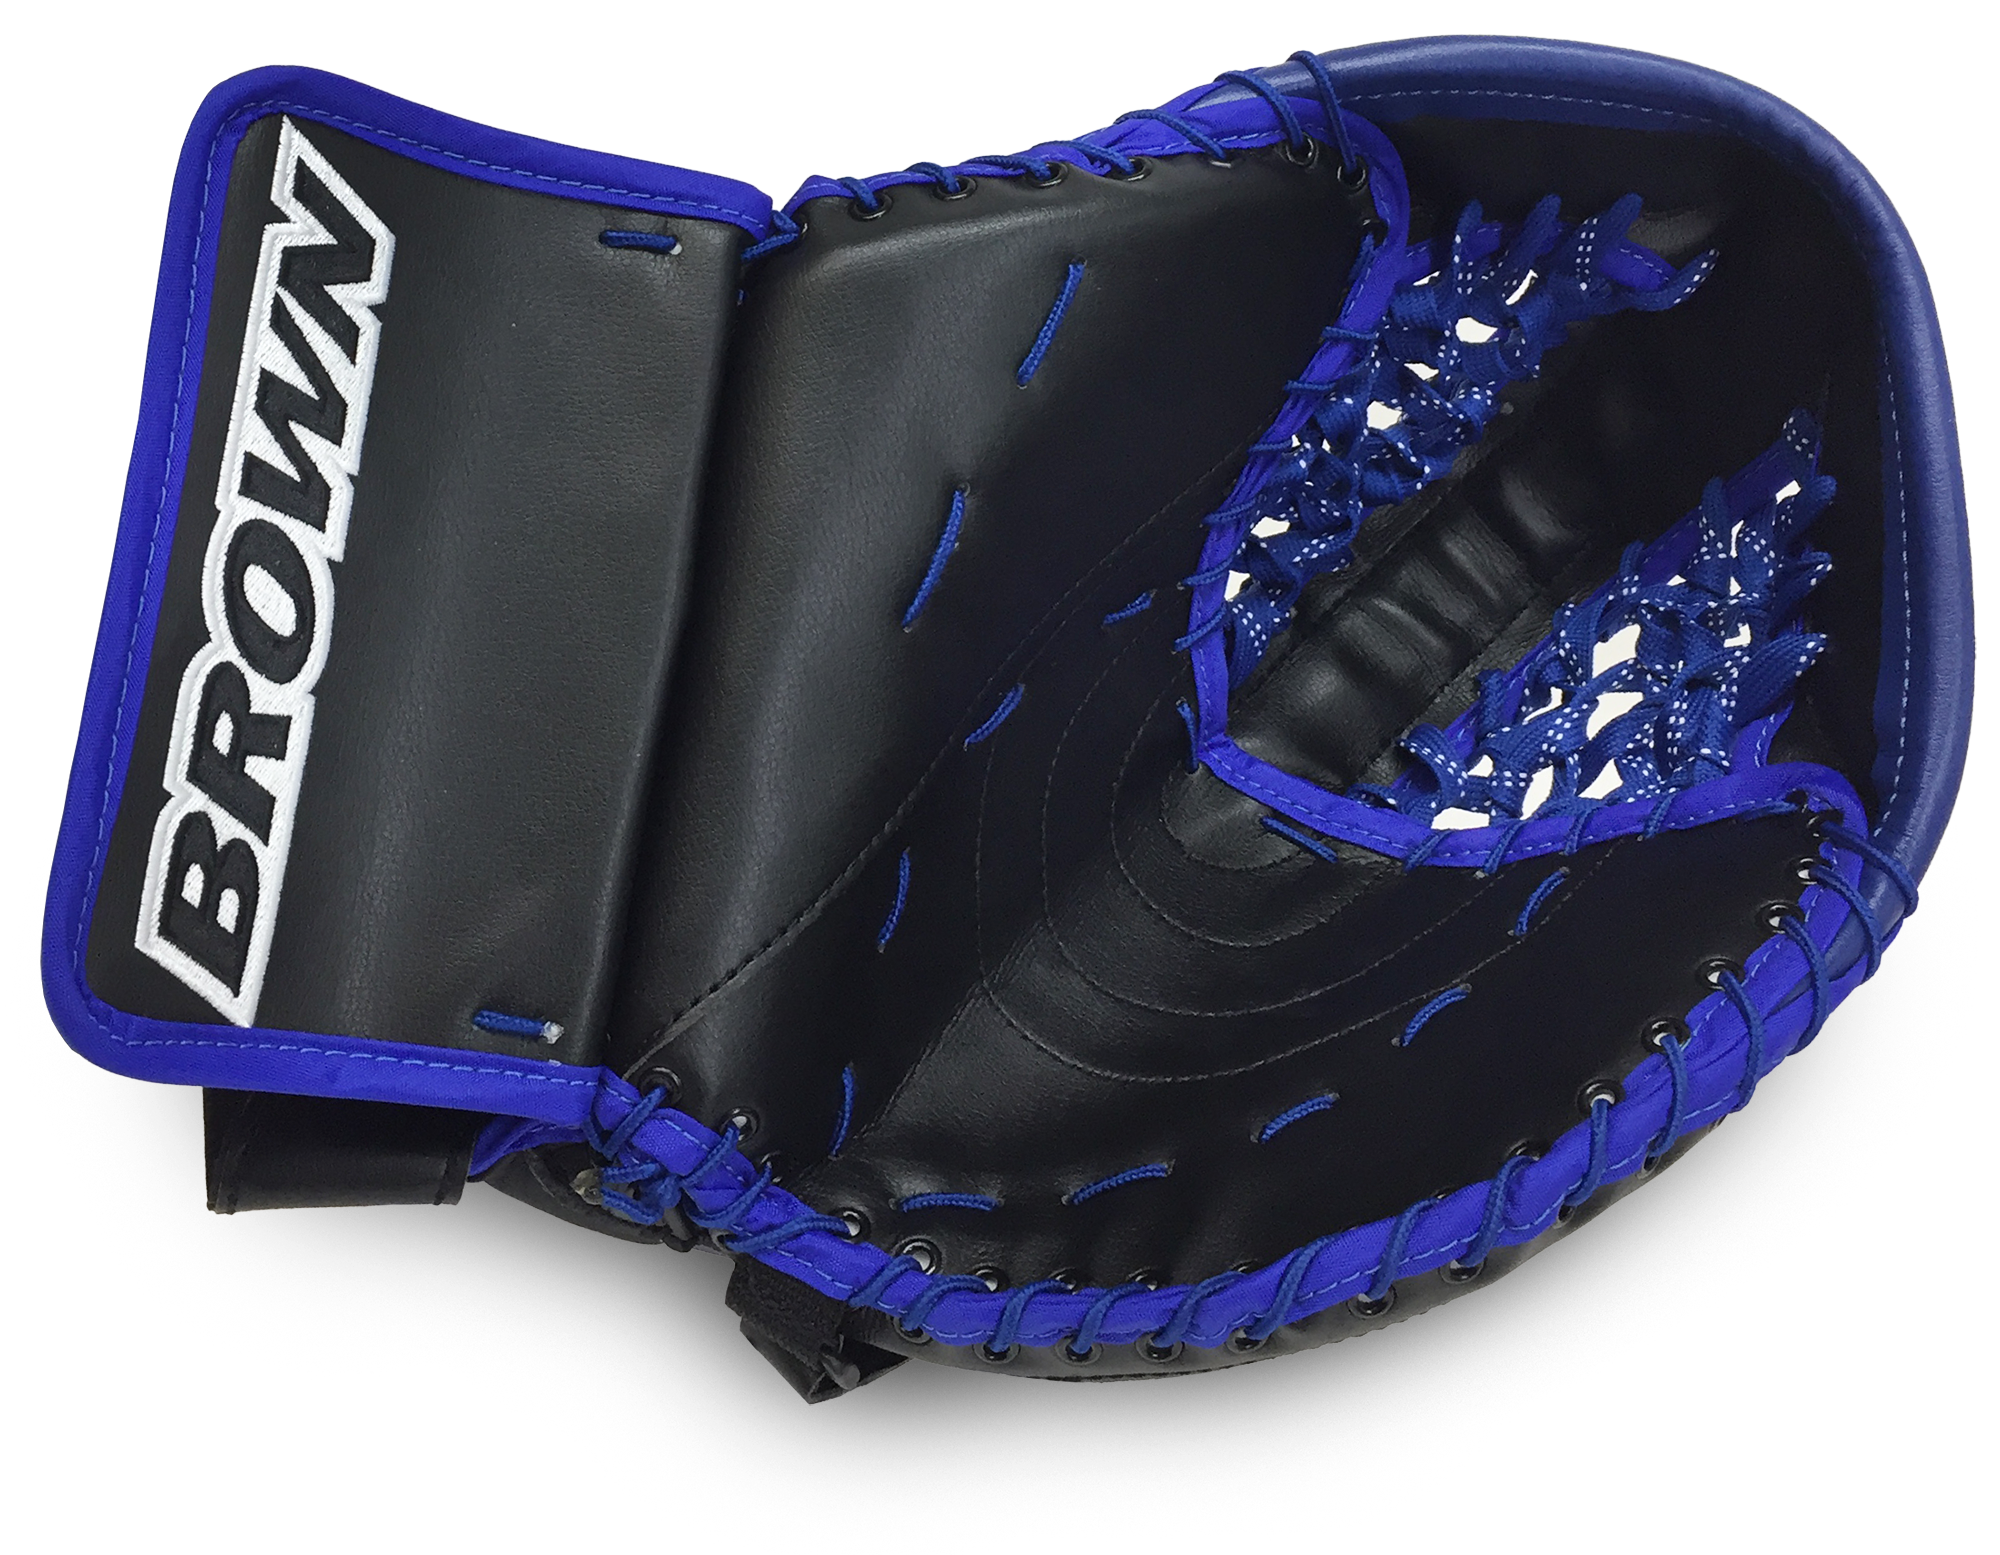 1800 catch glove in black and royal blue